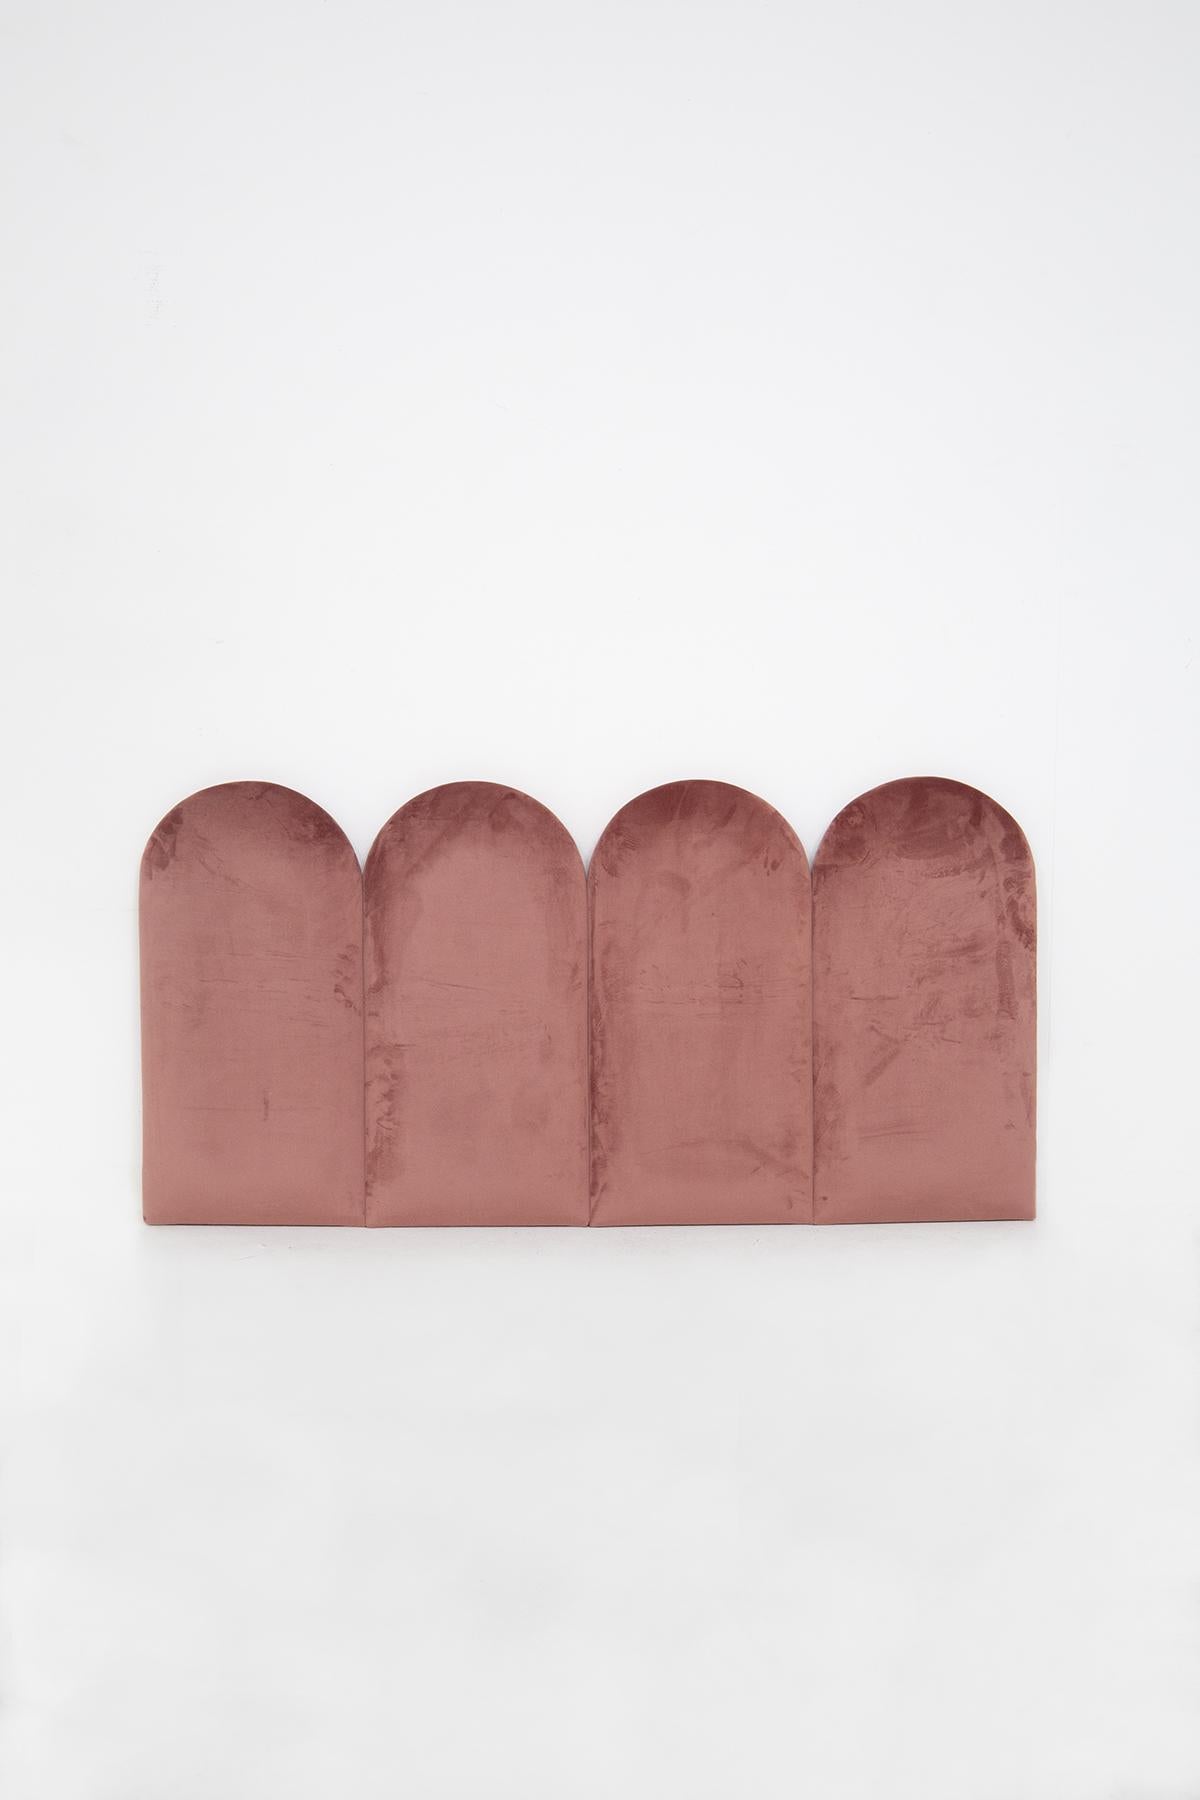 Wonderful customizable bed headboard, made in Italy by Vinta Domus, new production.
The headboard is totally made of a fantastic pink velvet, very soft and comfortable. The structure is created by segments that round off at the tip, giving